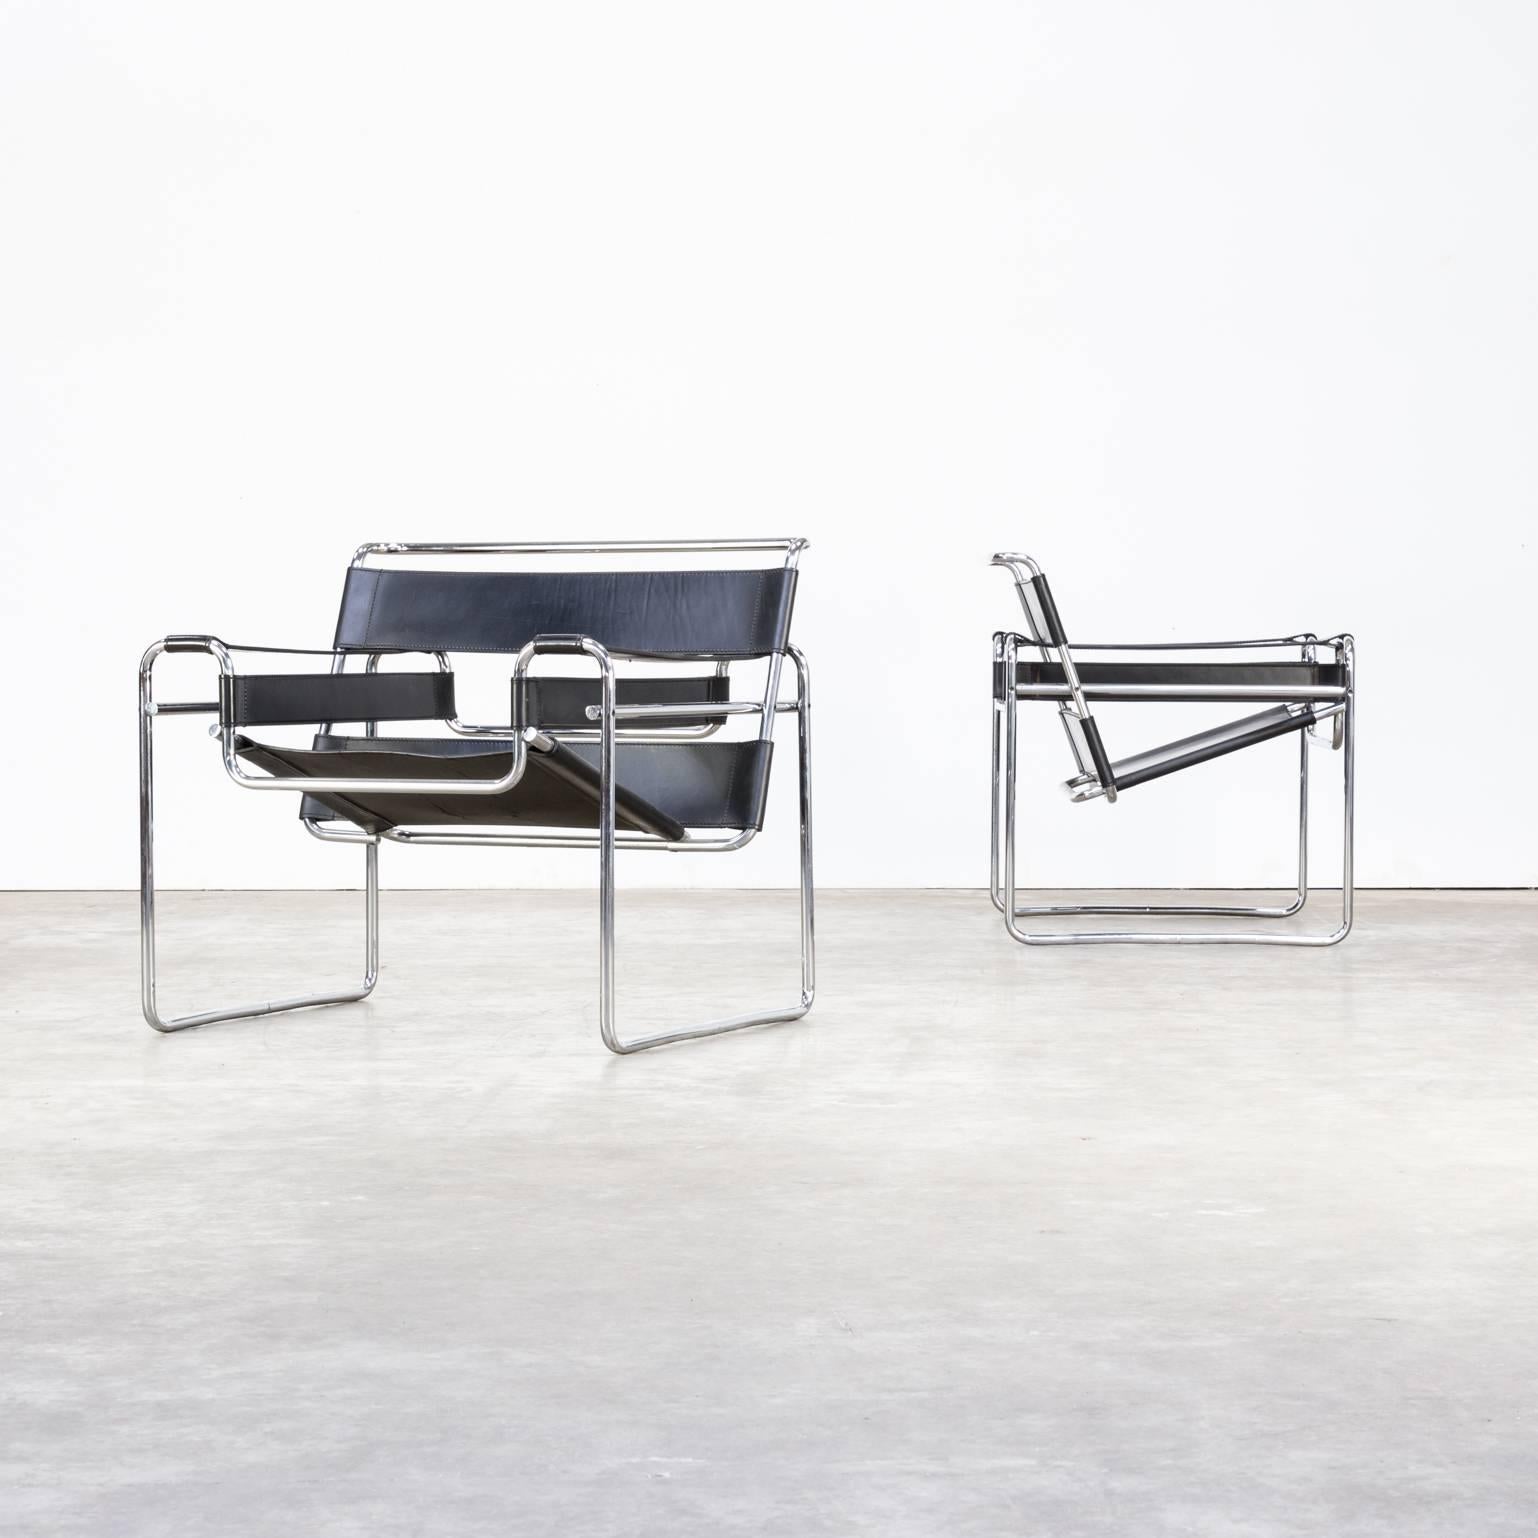 Marcel Breuer ‘wassily’ B3 chairs black leather for Gavina set of two. Good condition, consistent with age and use.